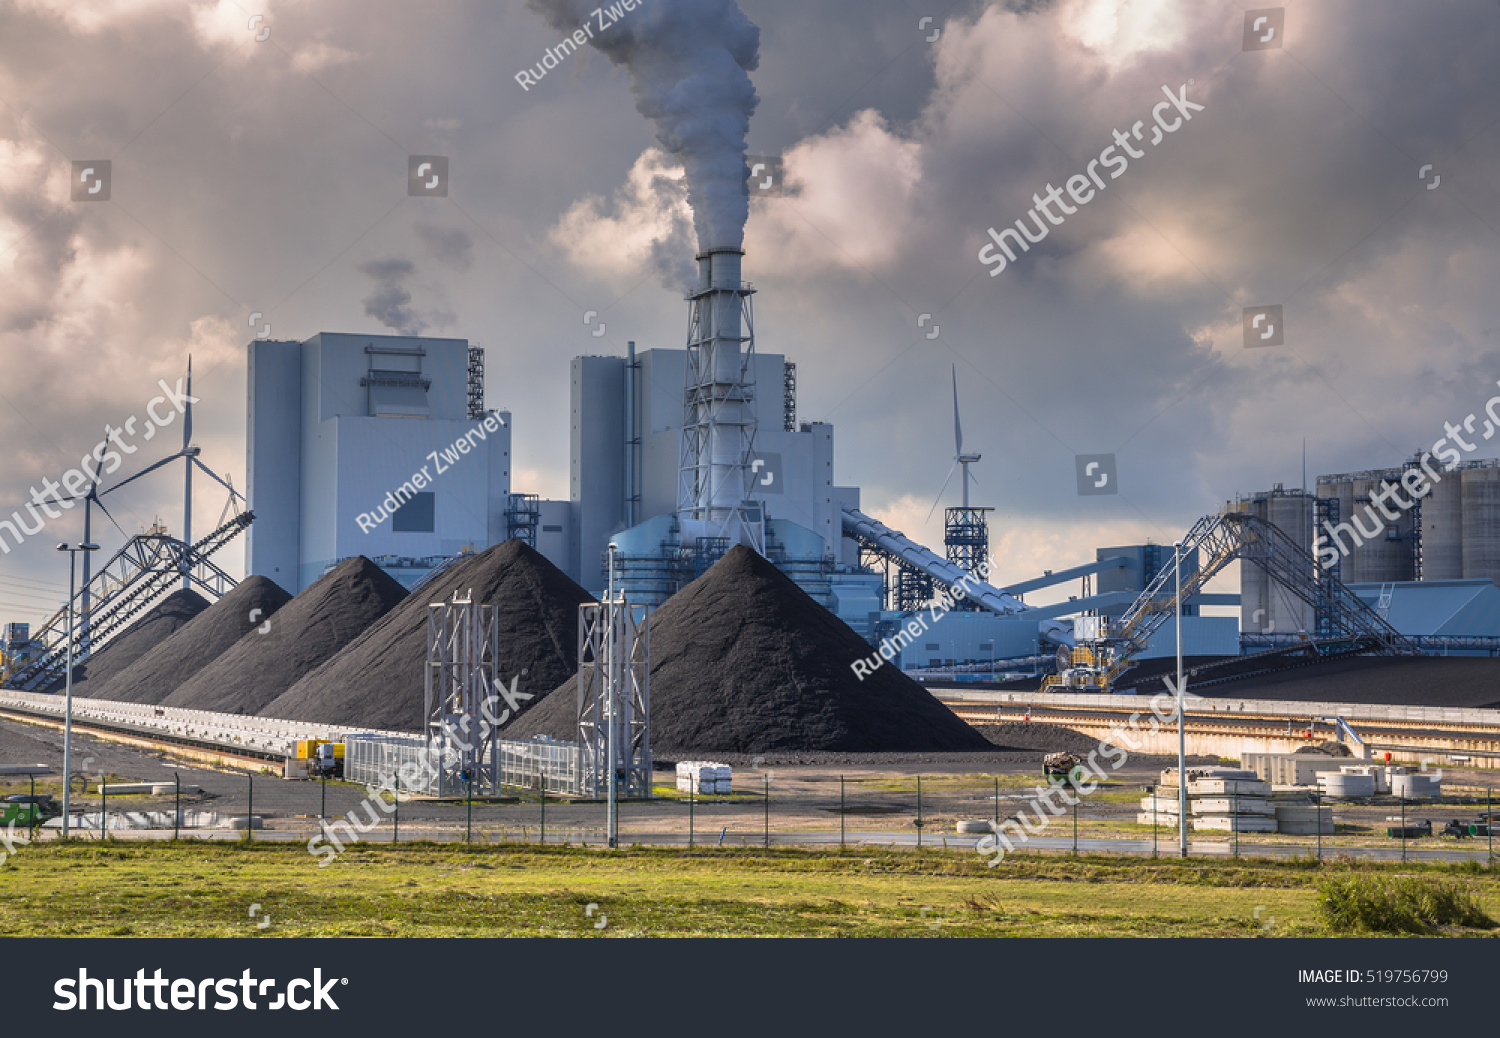 Heavy industrial coal powered electricity plant with pipes and smoke in black and white #519756799